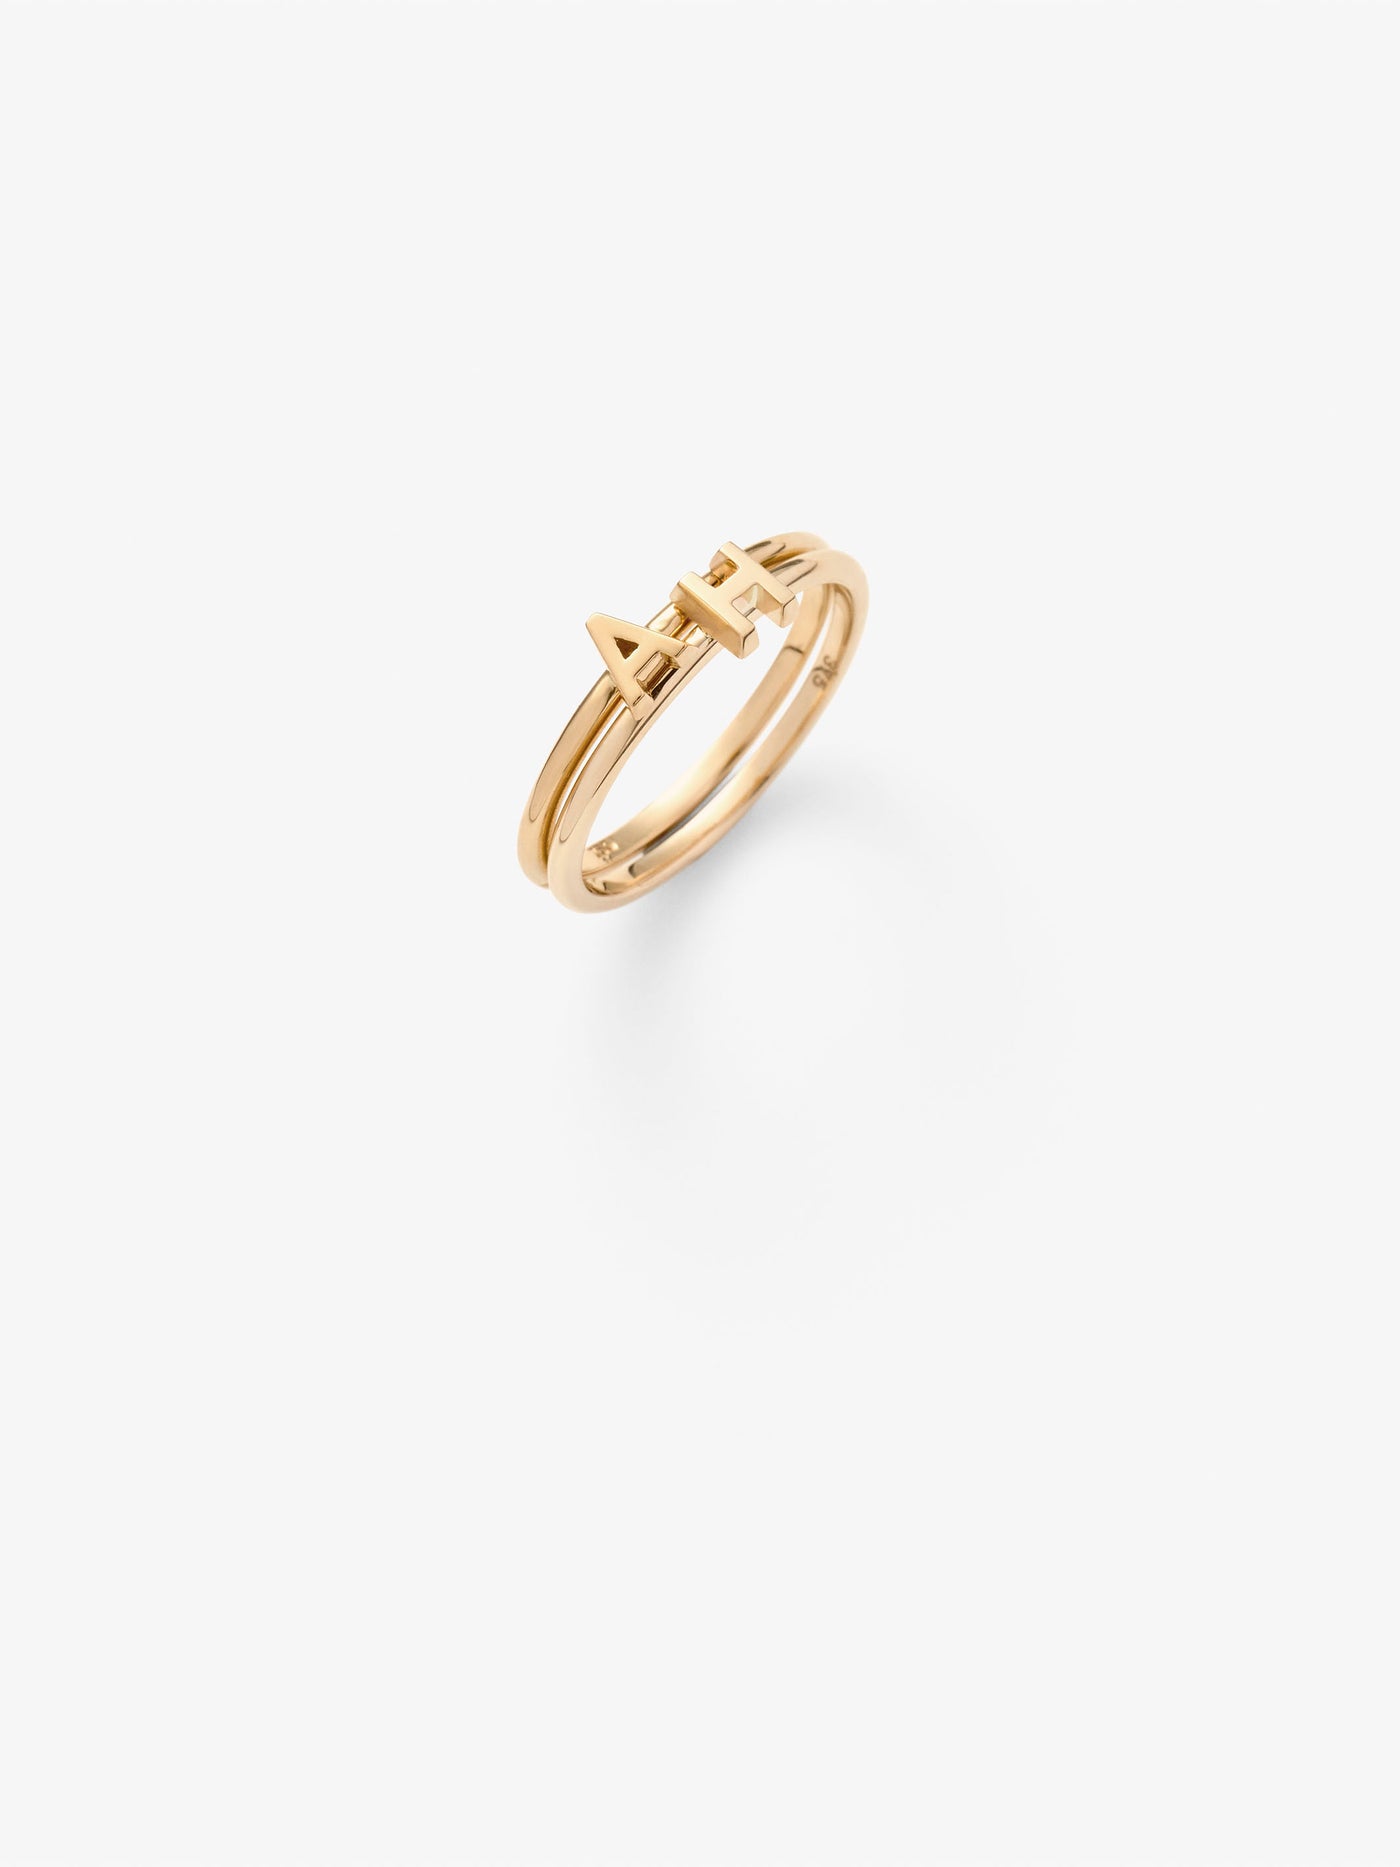 Two Letters Pinky Ring in 18k Gold